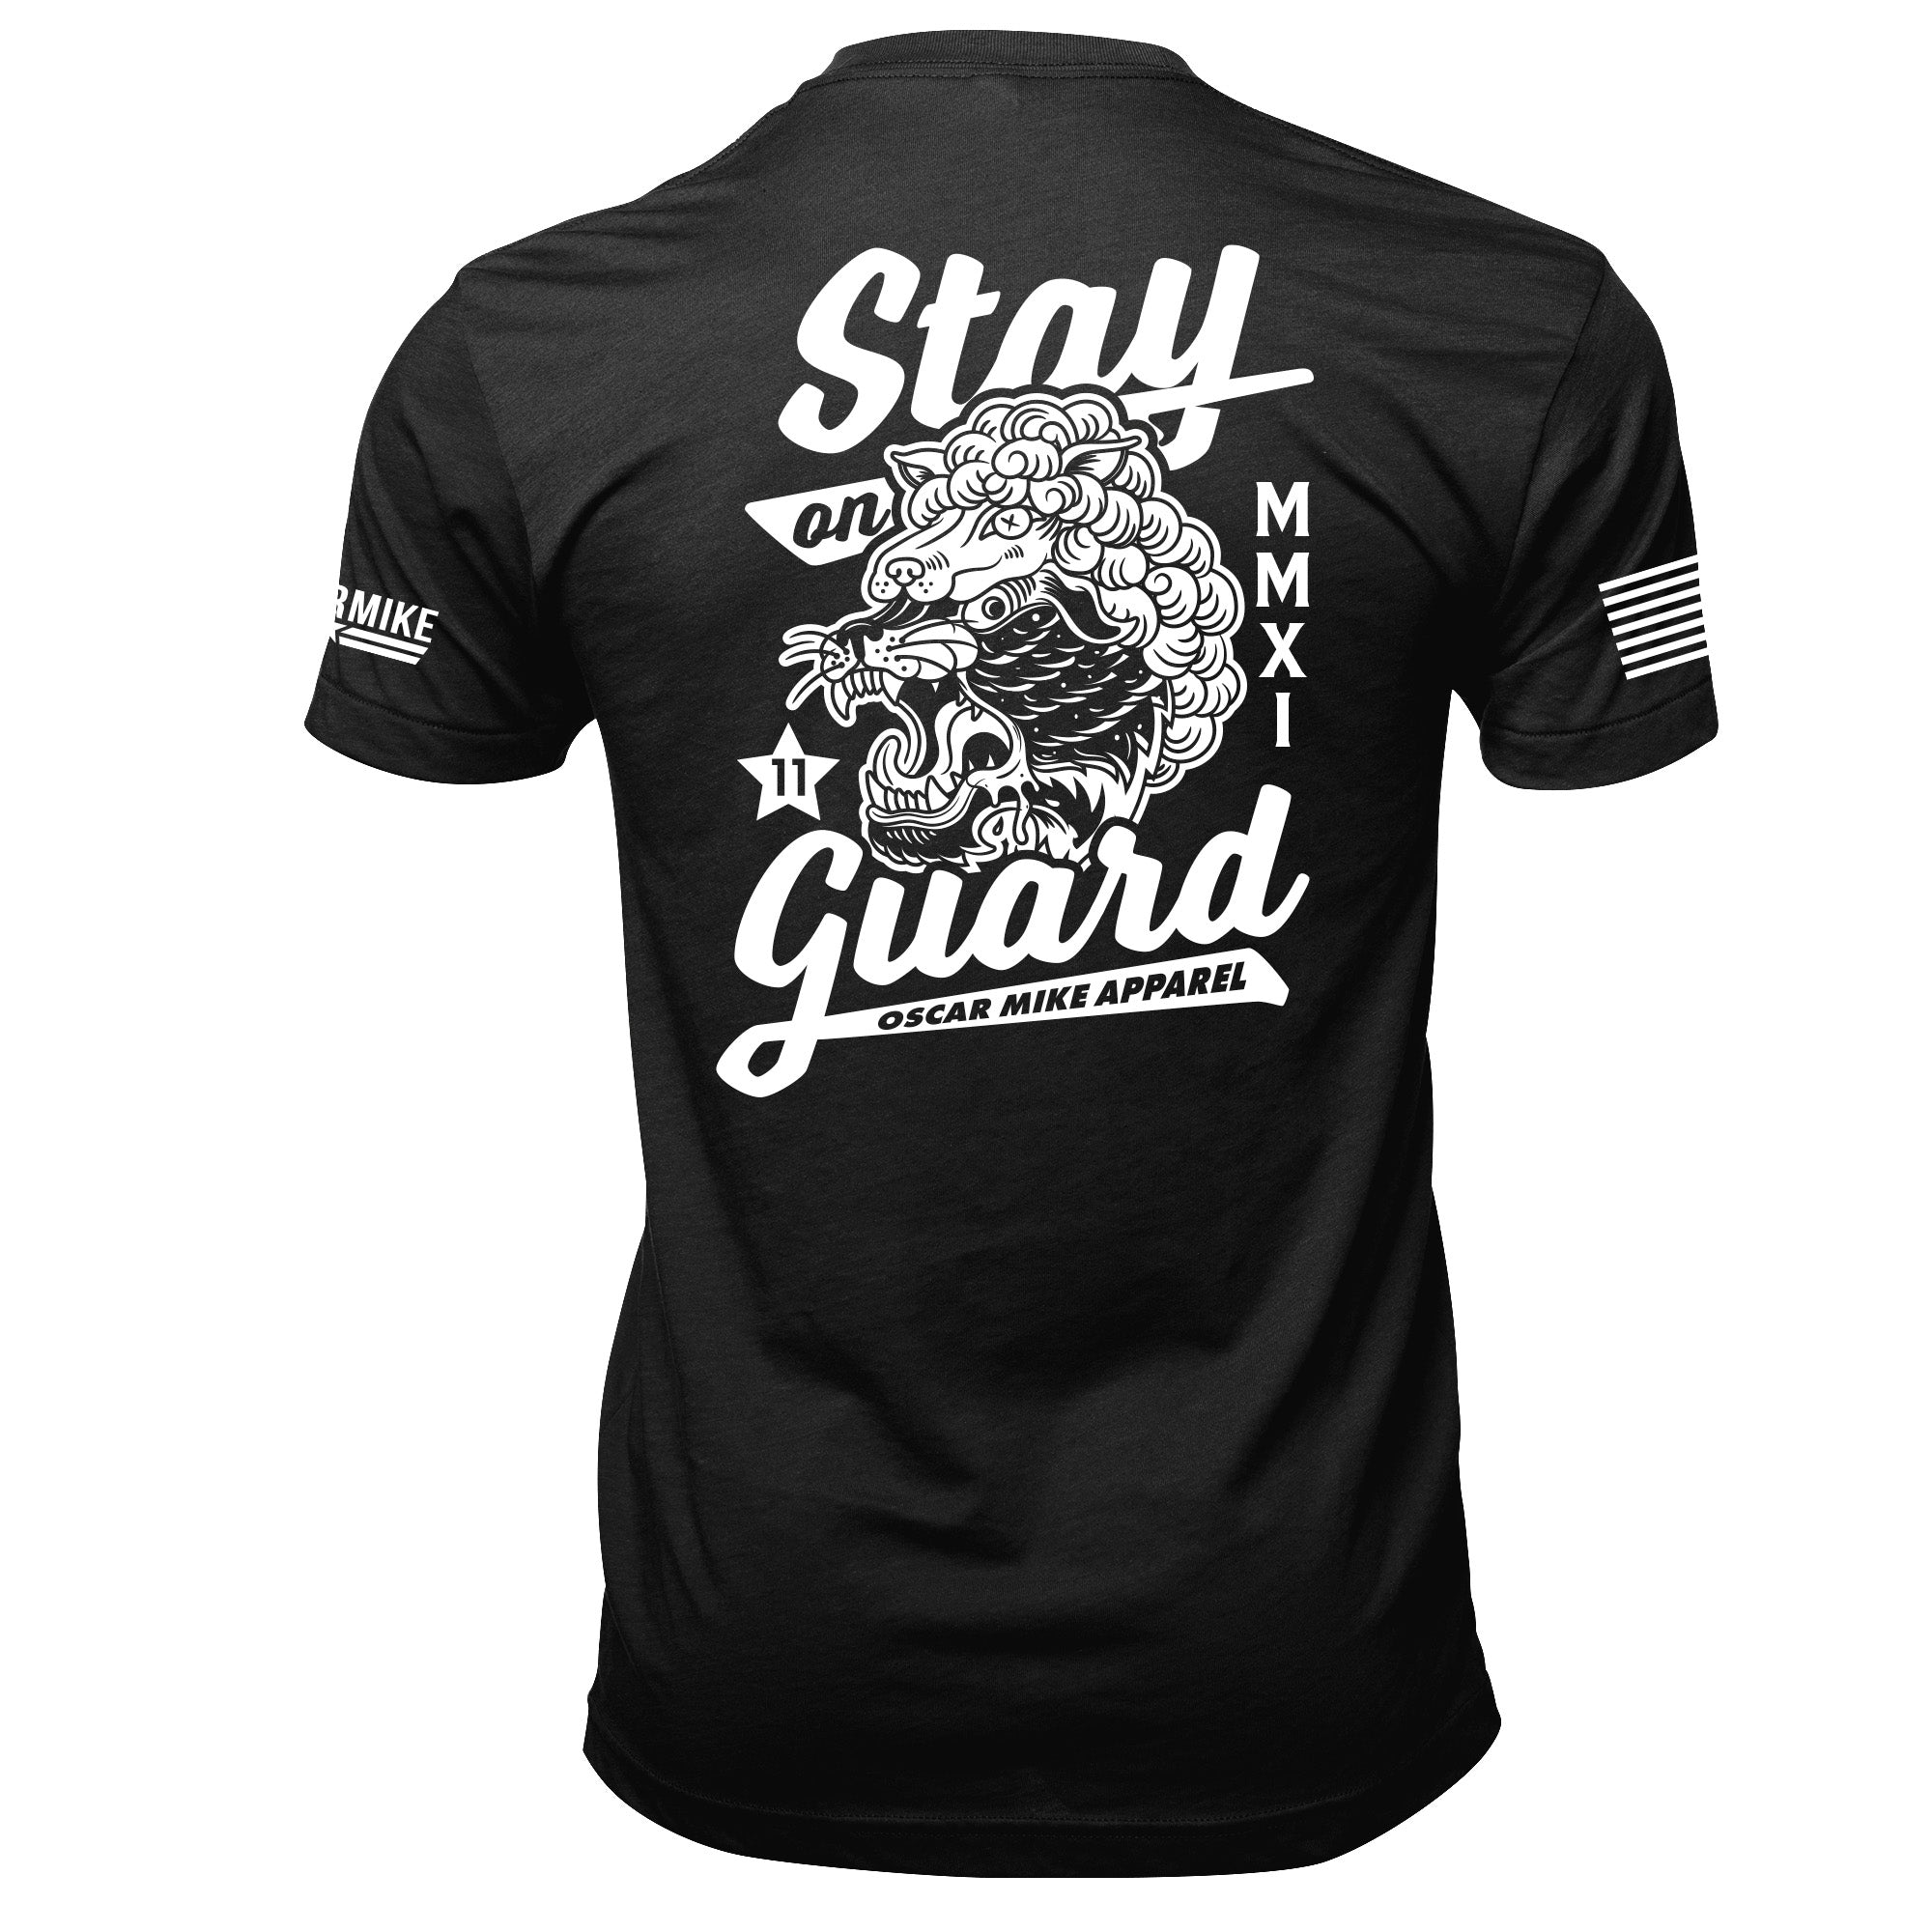 Stay on Guard Tee